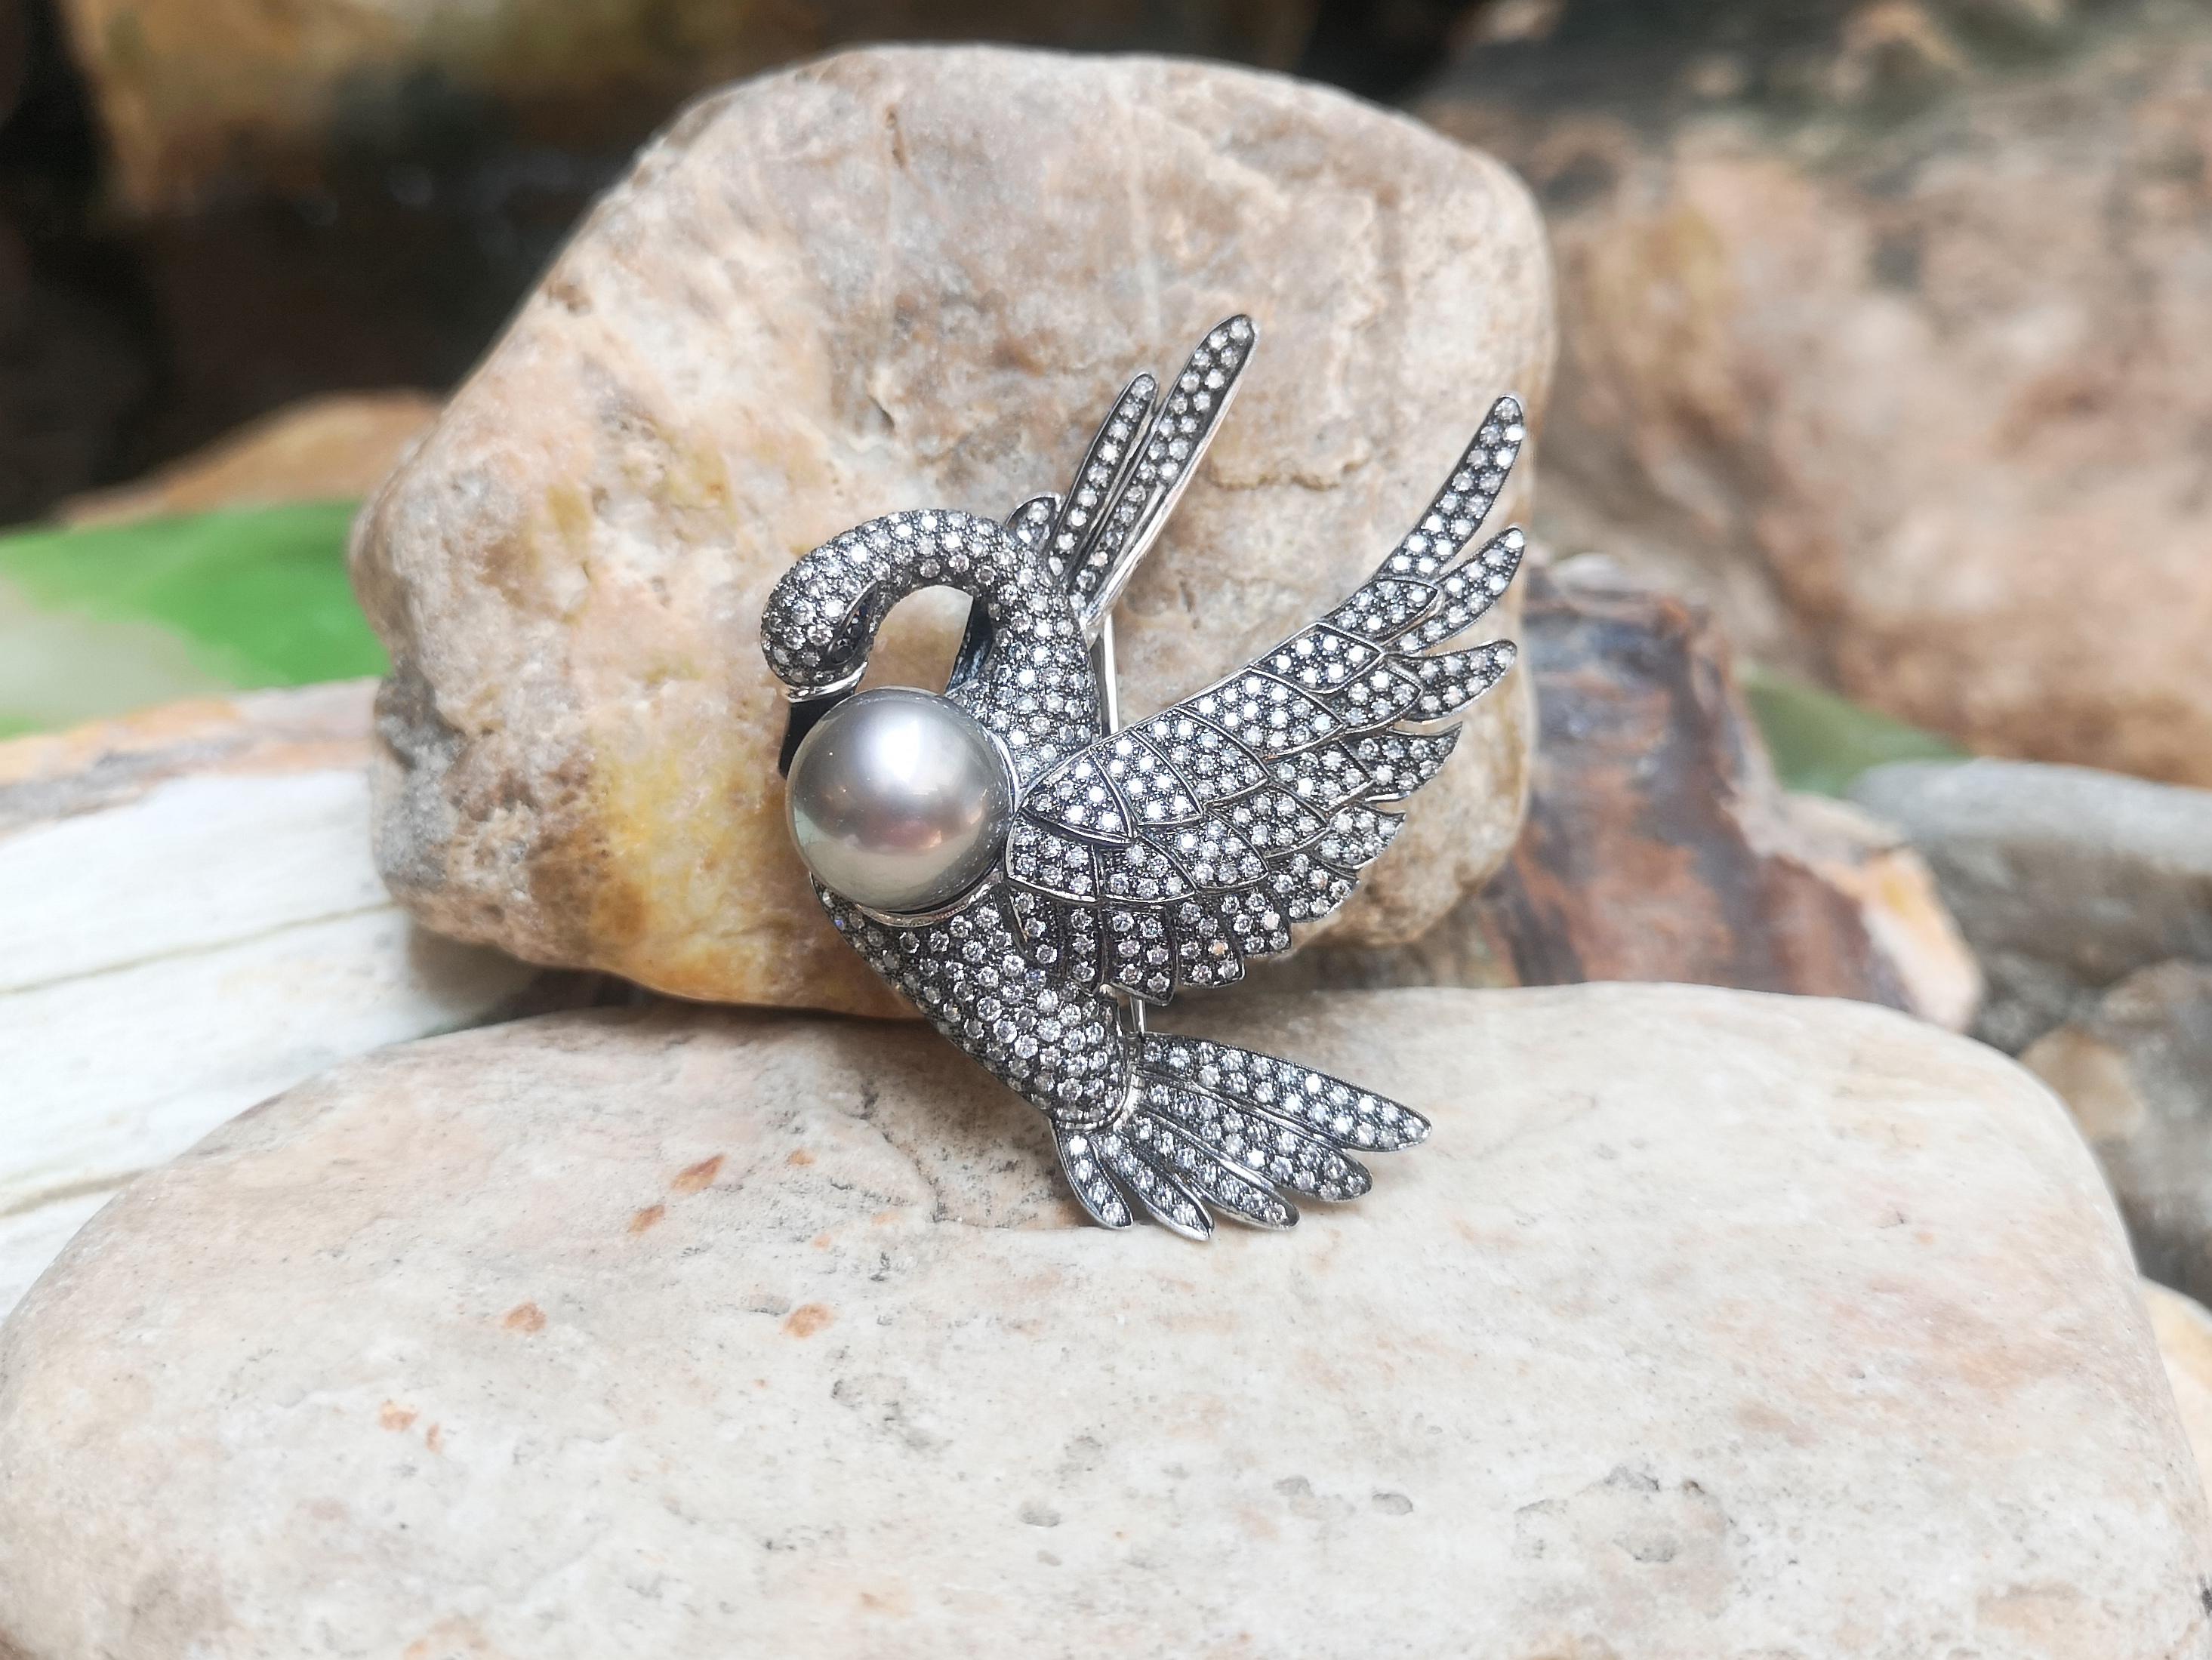 South Sea Pearl with Gray Diamond 5.48 carats and Brown Diamond 0.07 carat Brooch set in 18 Karat White Gold Settings

Width:  6.0 cm 
Length: 6.2 cm
Total Weight: 29.79 grams

